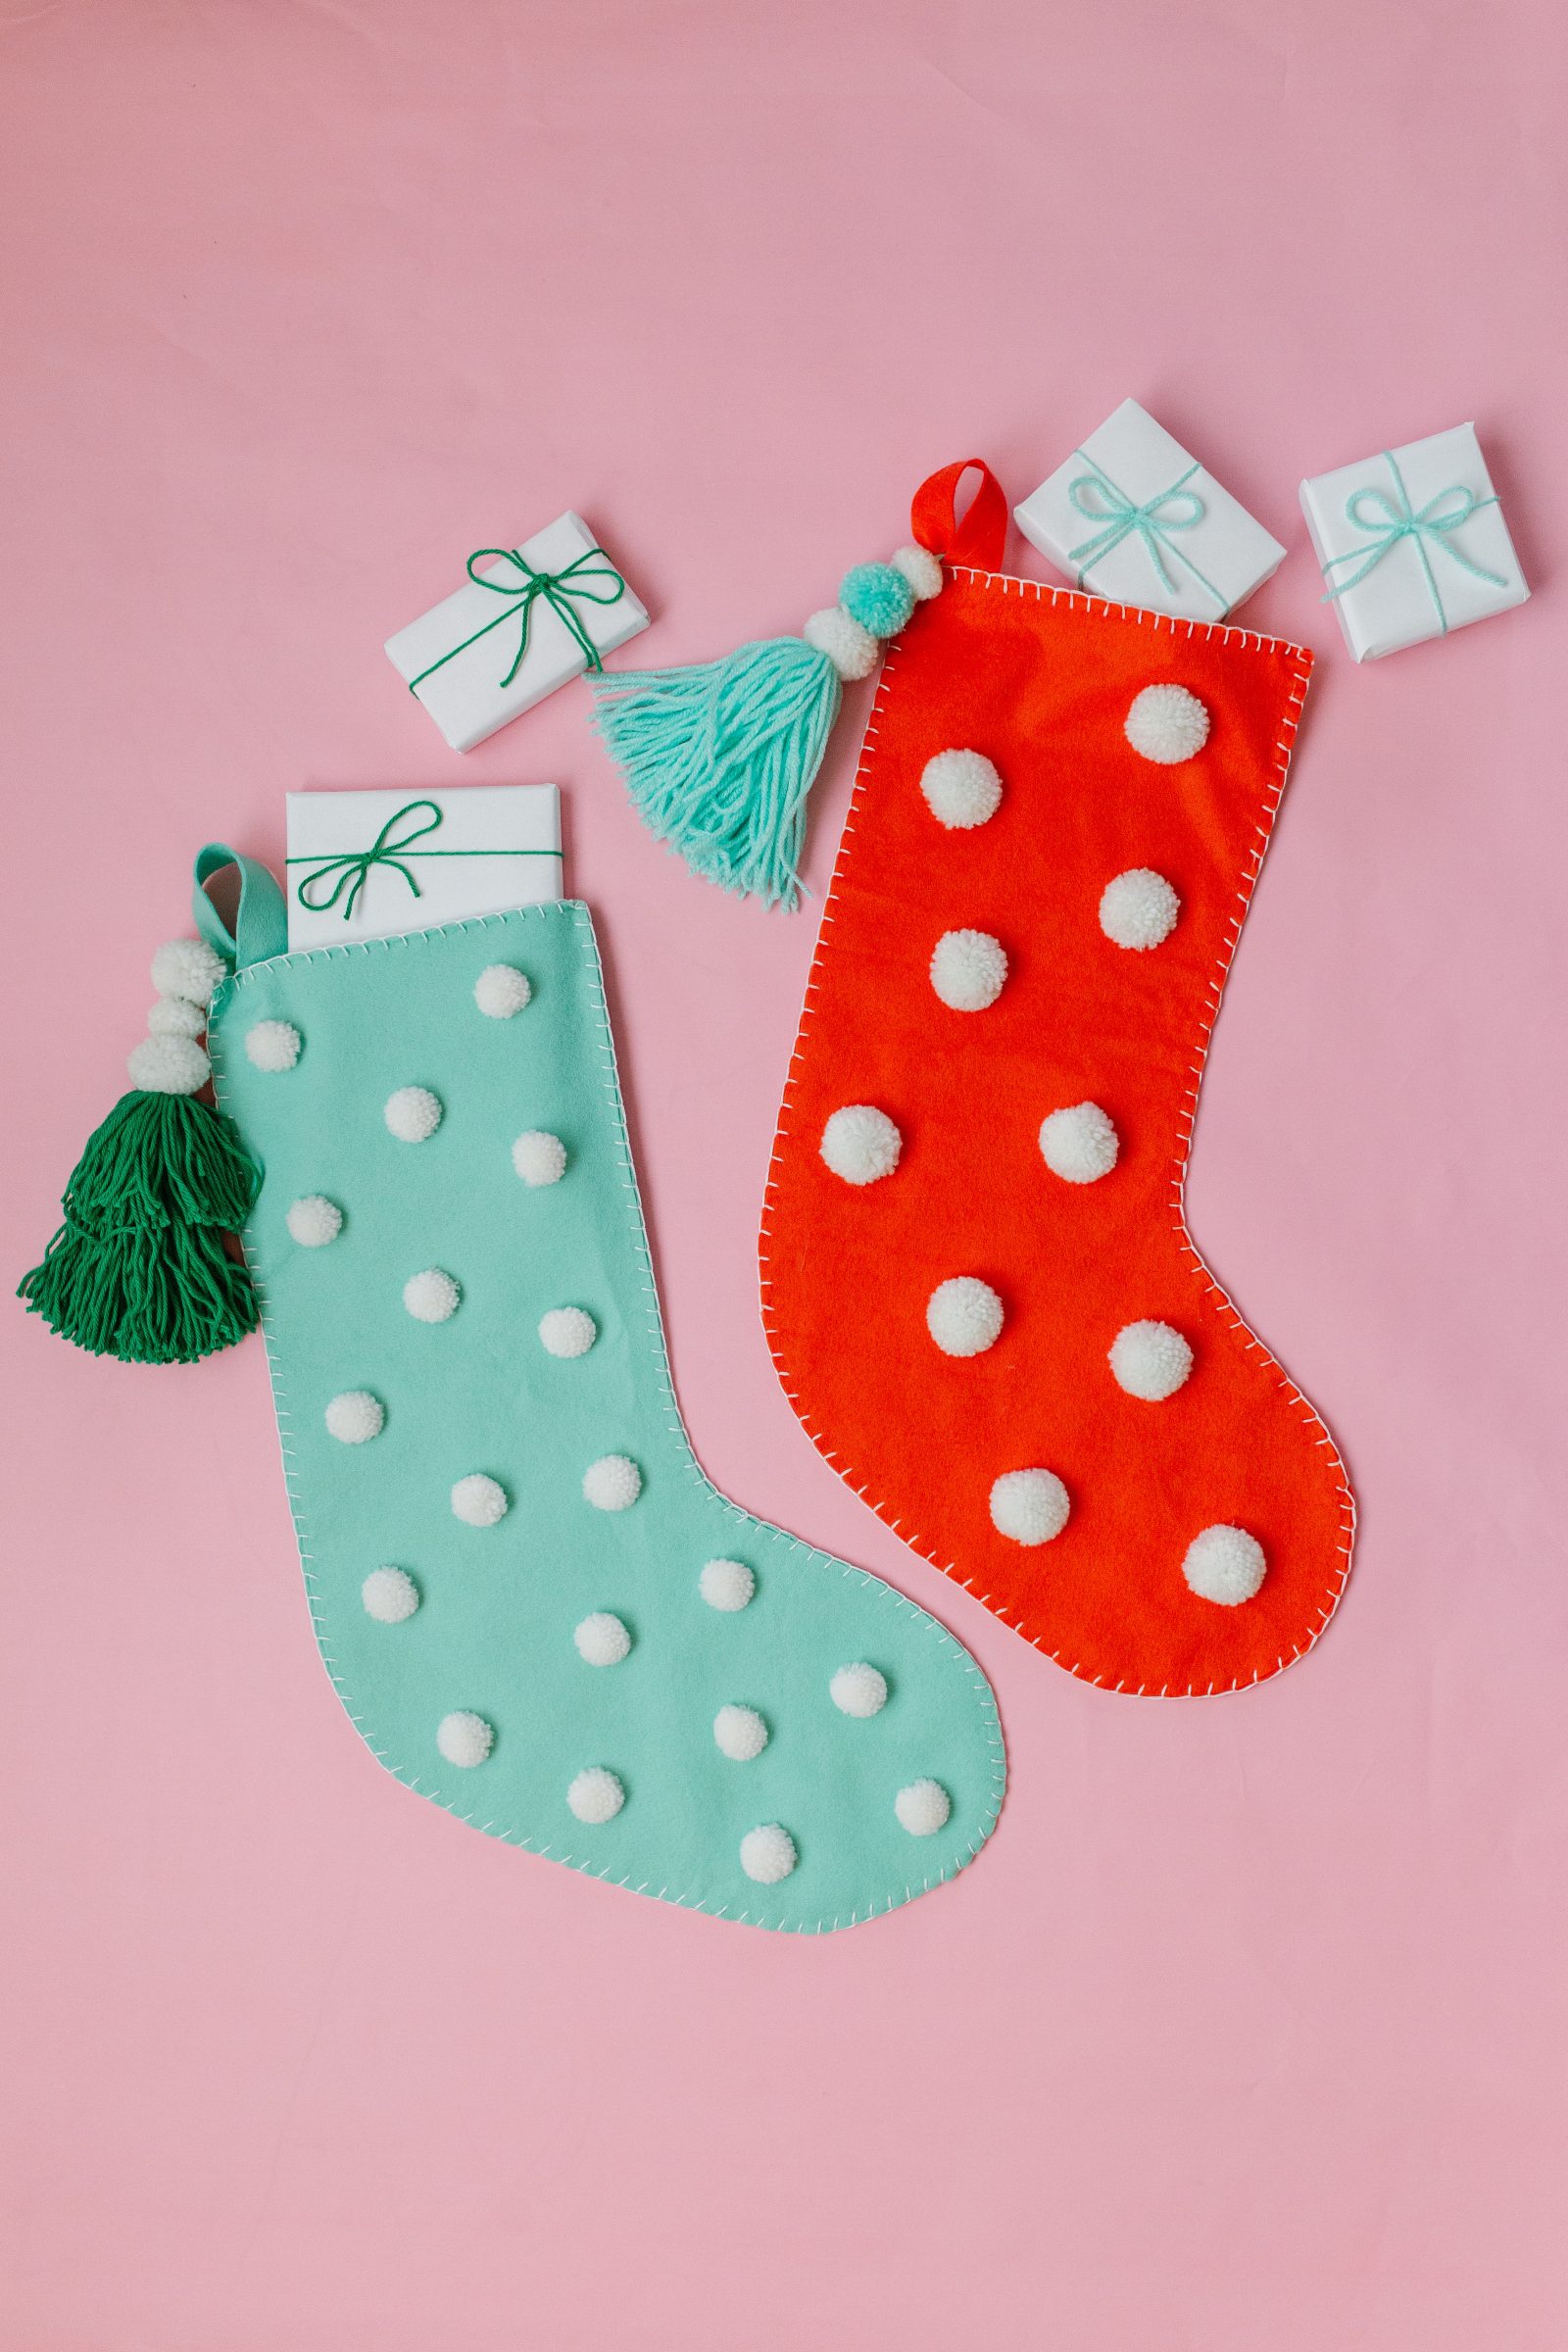 Christmas Crafts: Stitched Felt and Pom Pom Stockings + a tutorial featured by Top US Craft Blog + The Pretty Life Girls